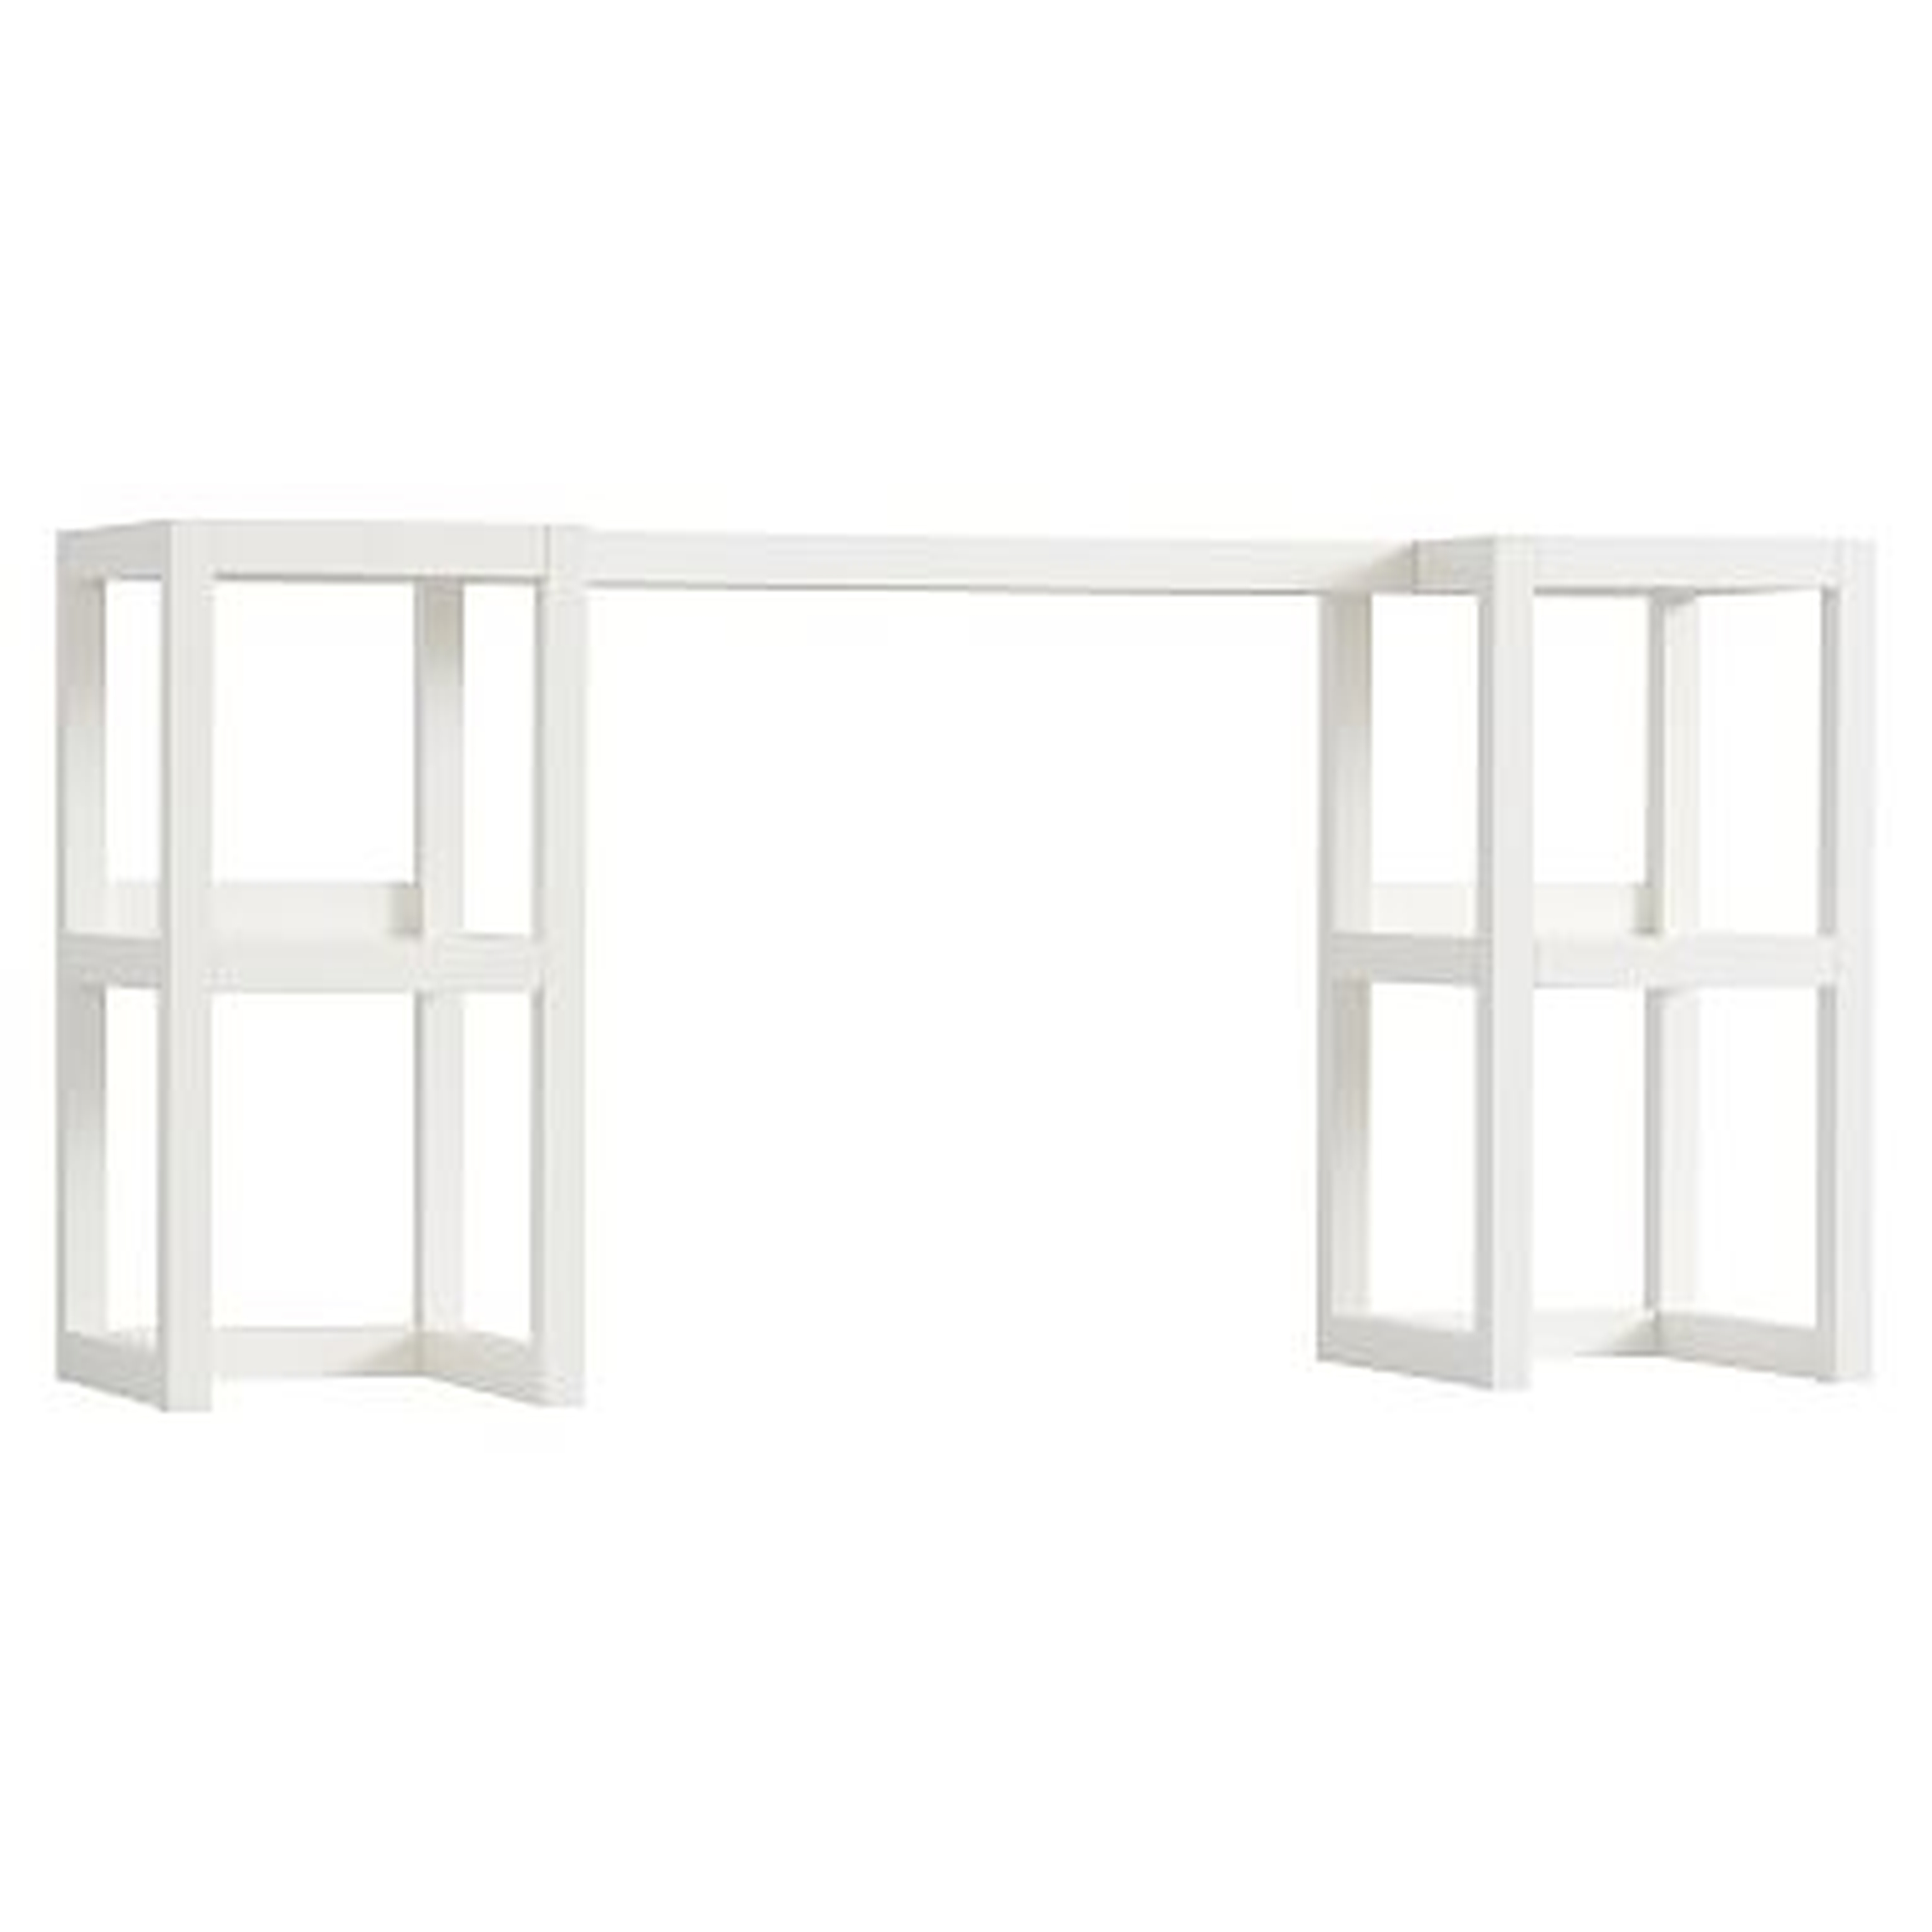 Austin Desk Hutch, Water-Based Simply White - Pottery Barn Teen